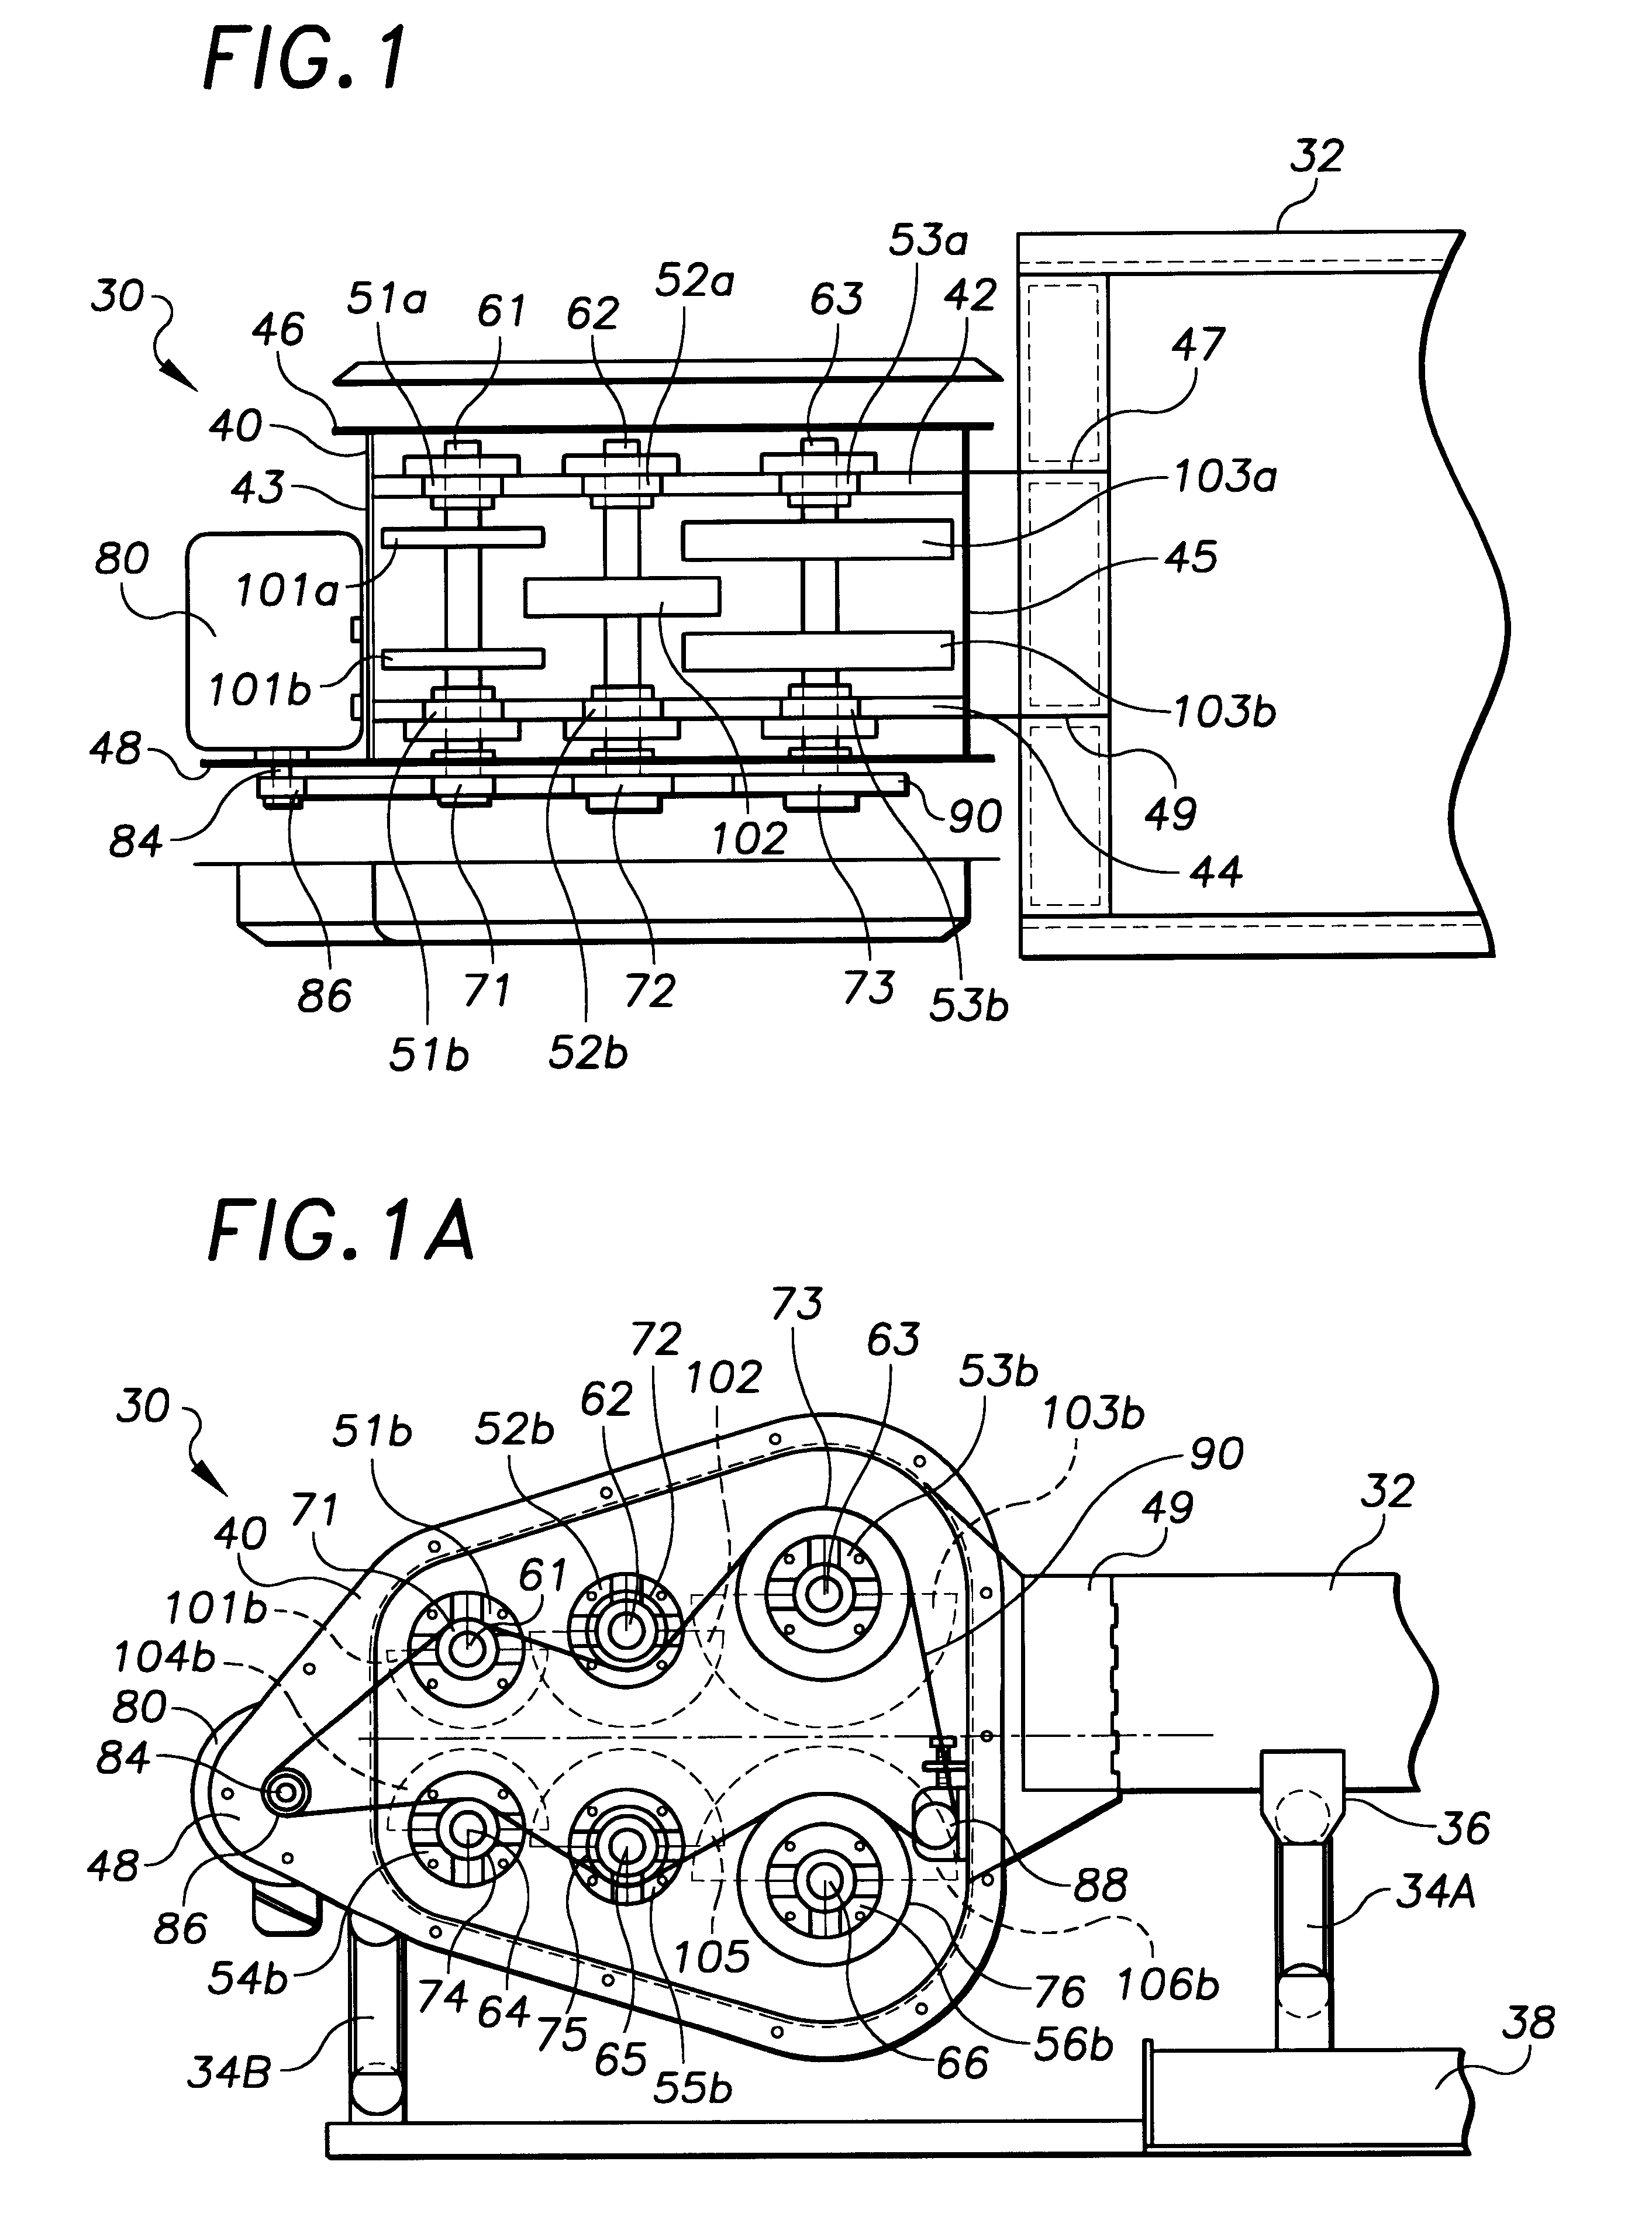 Differential motion conveyor drive